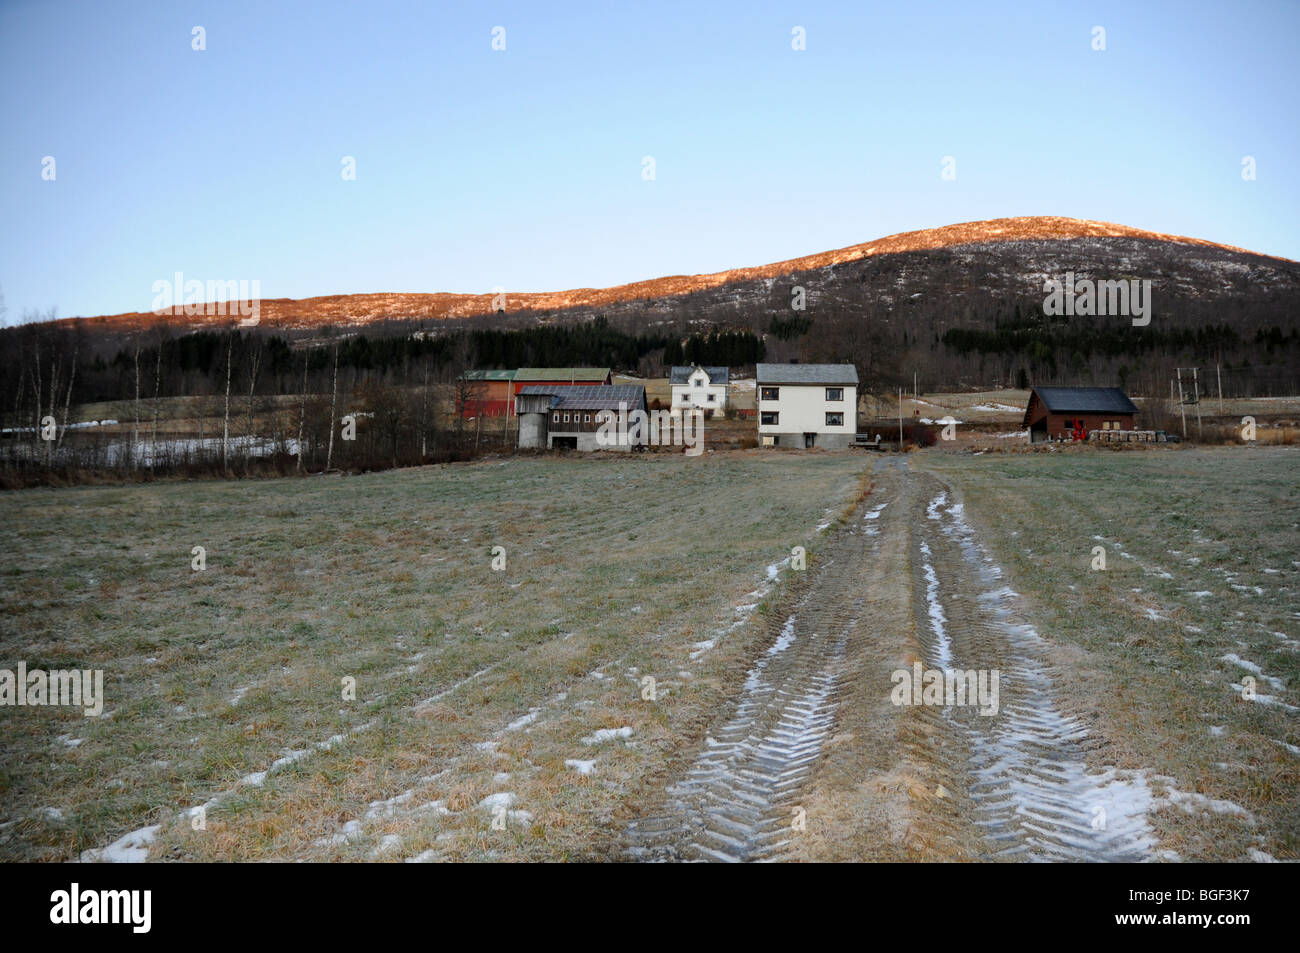 A mountain farm in Norway with the low sun on the mountain behind, winter Stock Photo